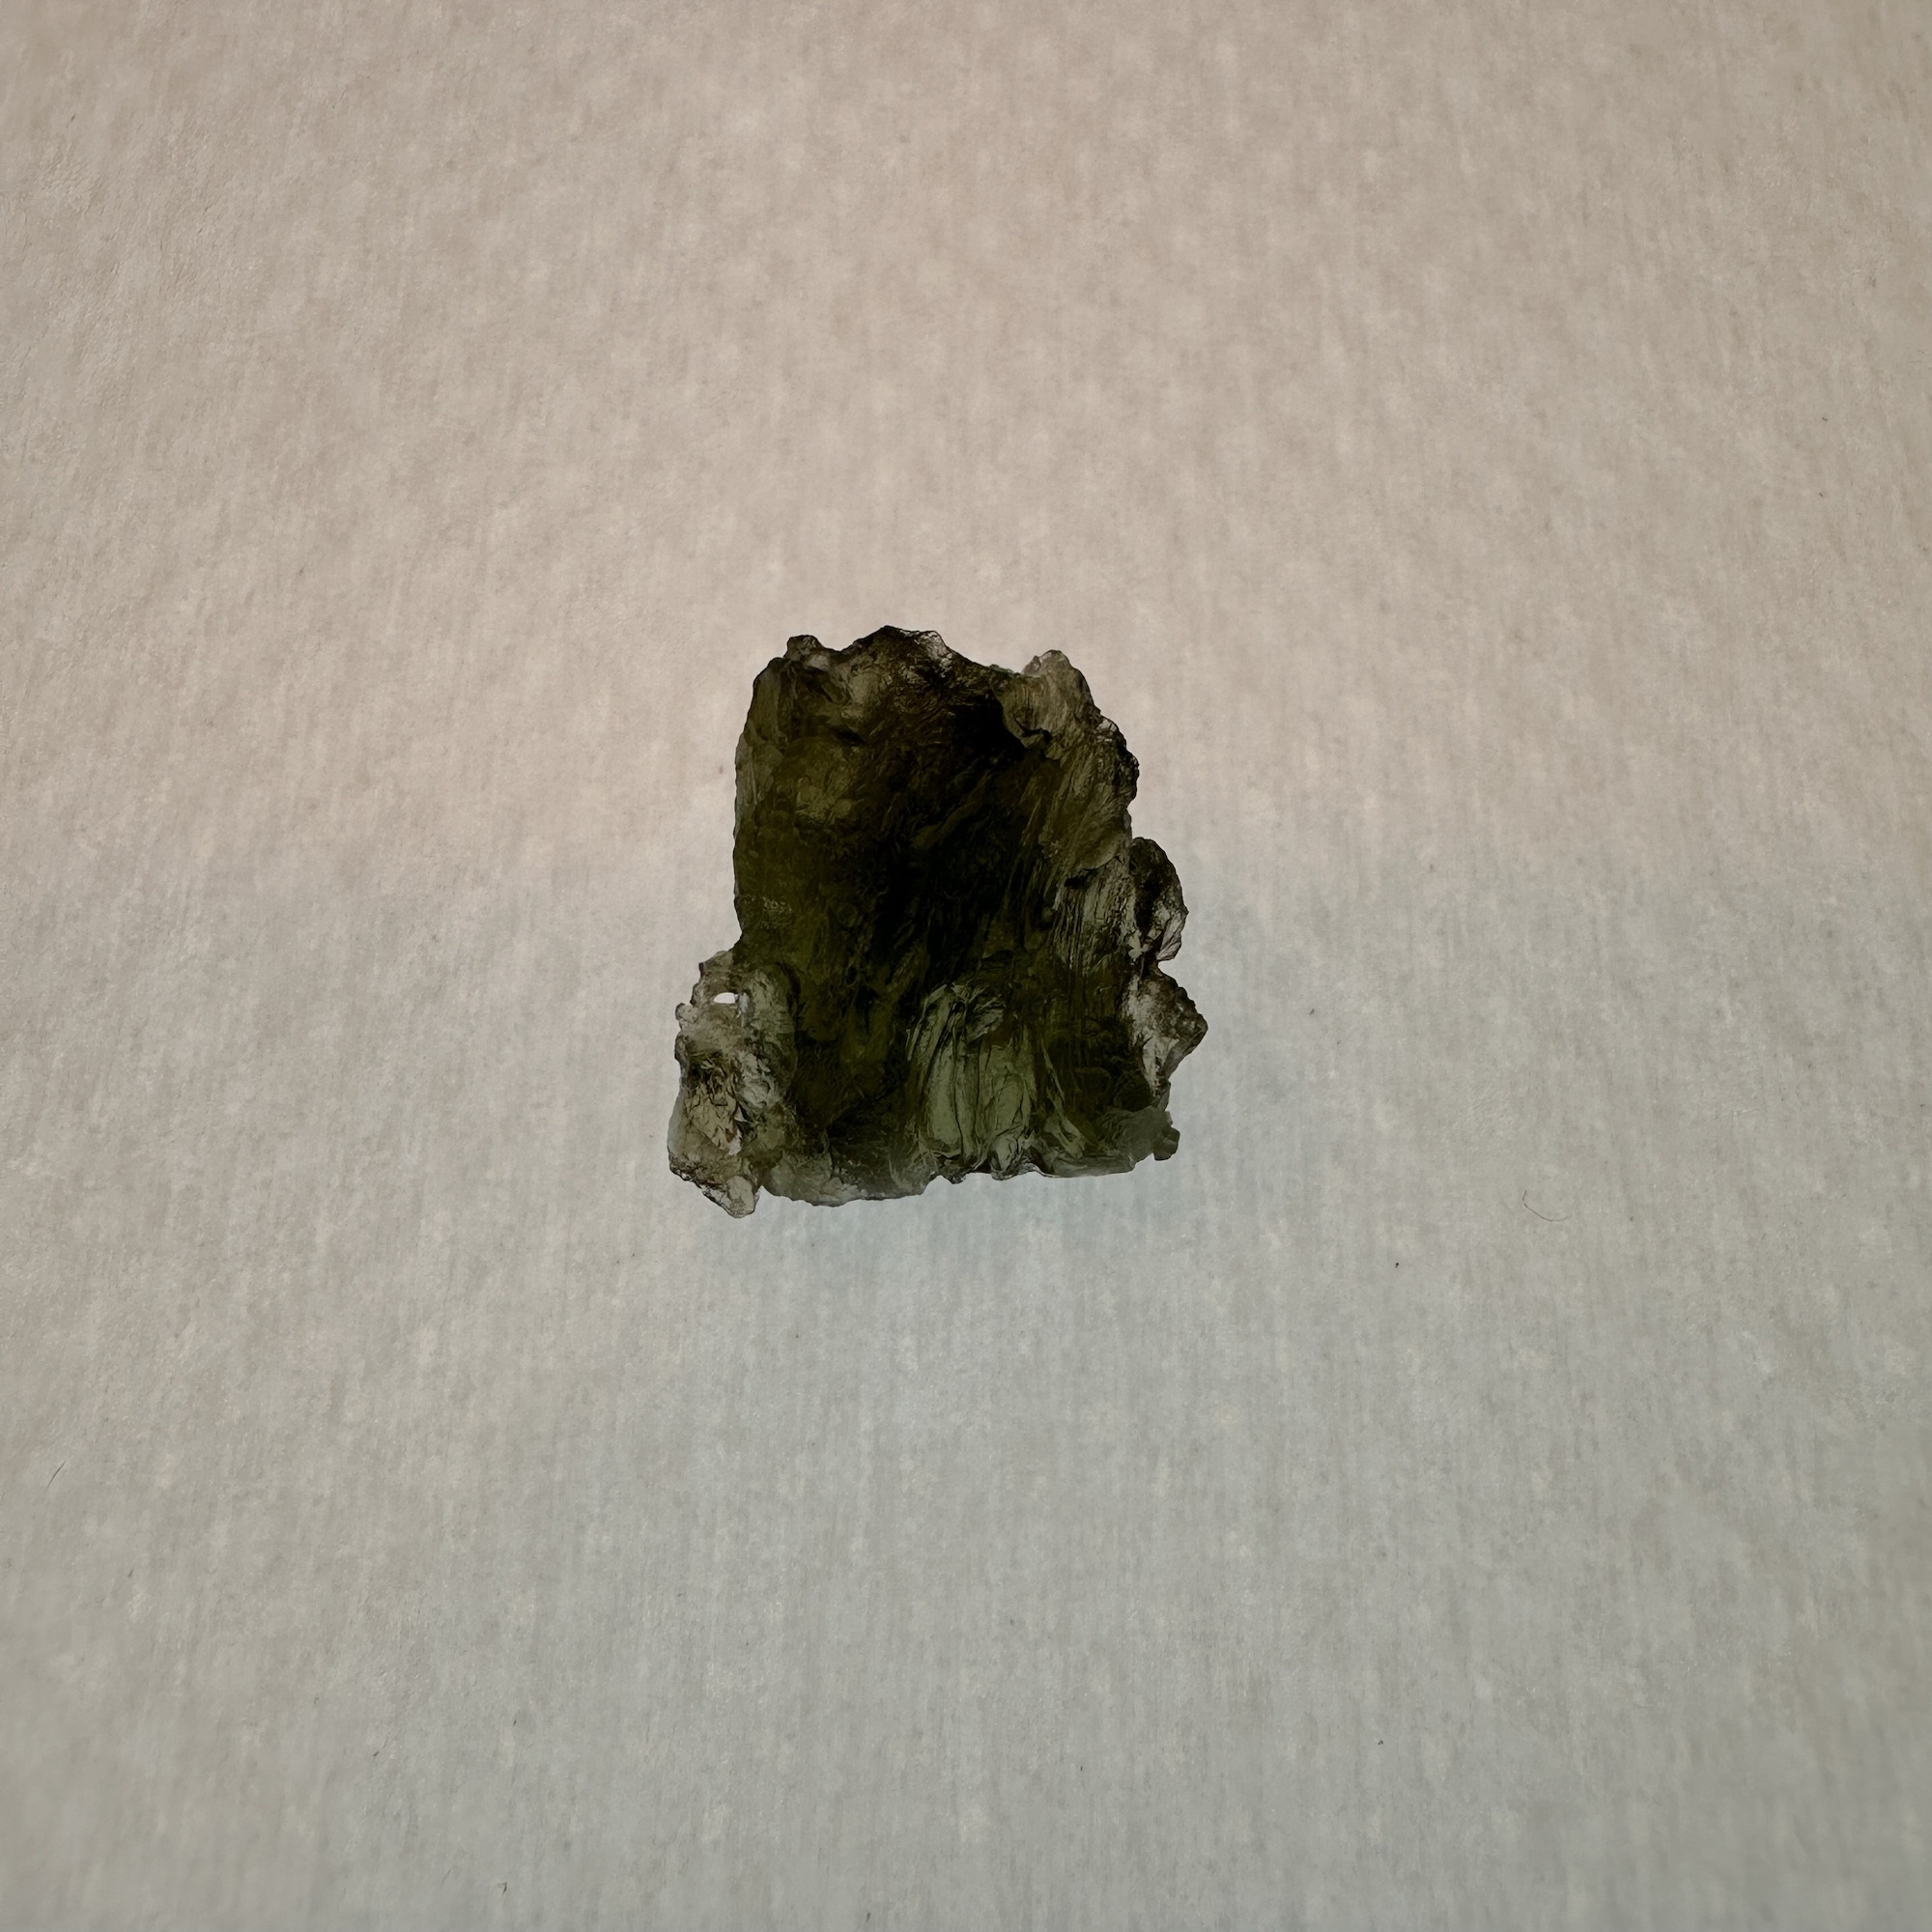 This exceptional Moldavite is approximately 1 inch long by 1 inch wide, and has a beautiful deep green color